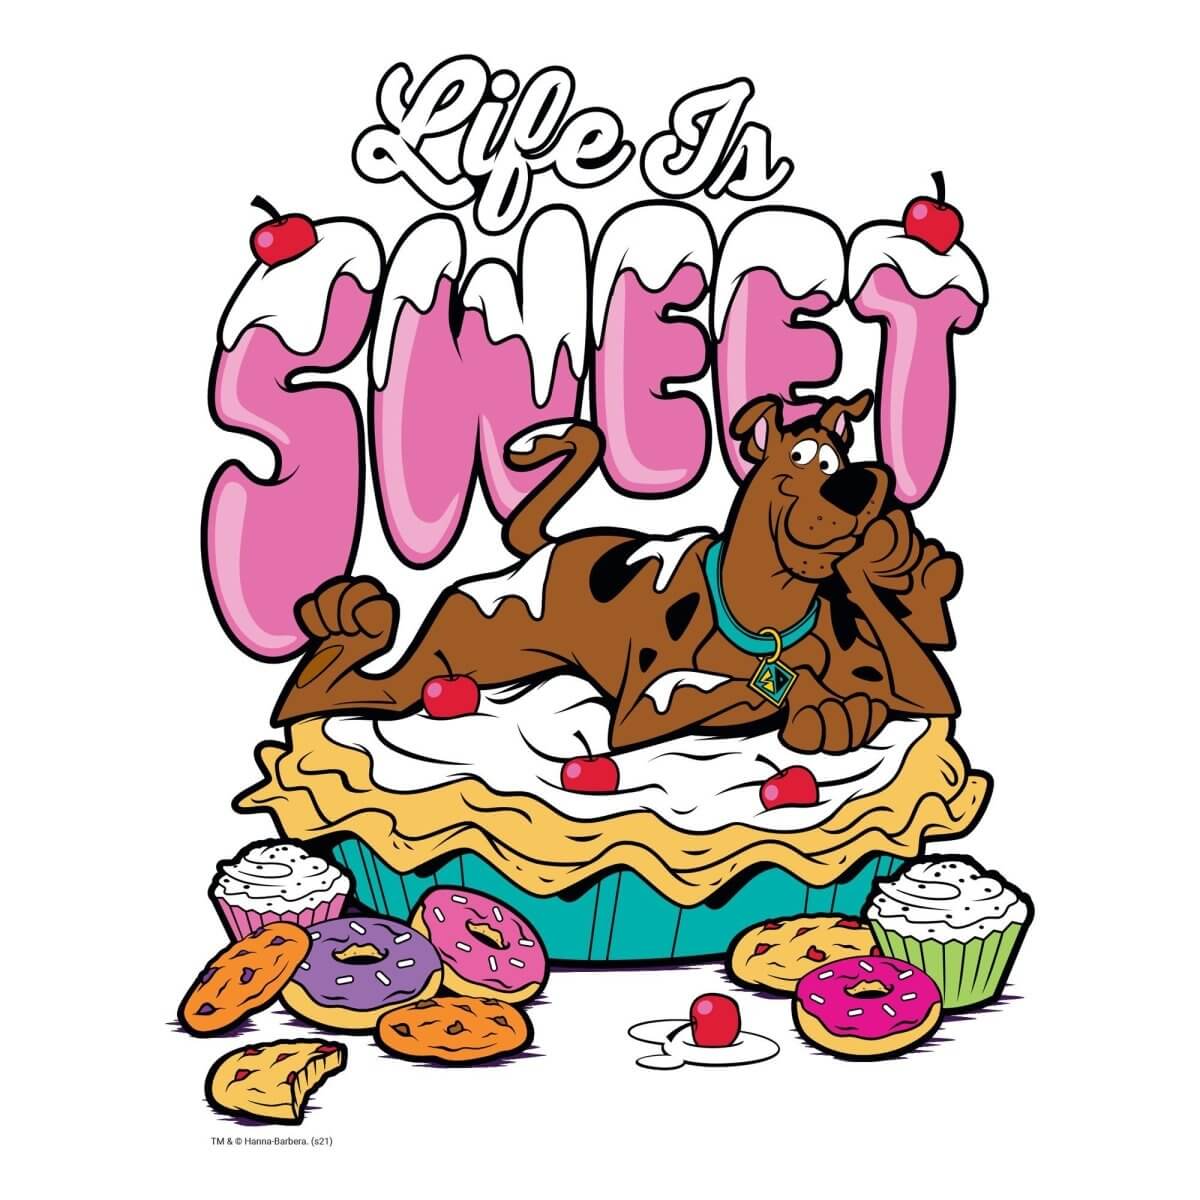 Kismet Decals Home & Room Decor Scooby-Doo Life is Sweet Wall decal sticker - officially licensed - latex printed with no solvent odor - Kismet Decals